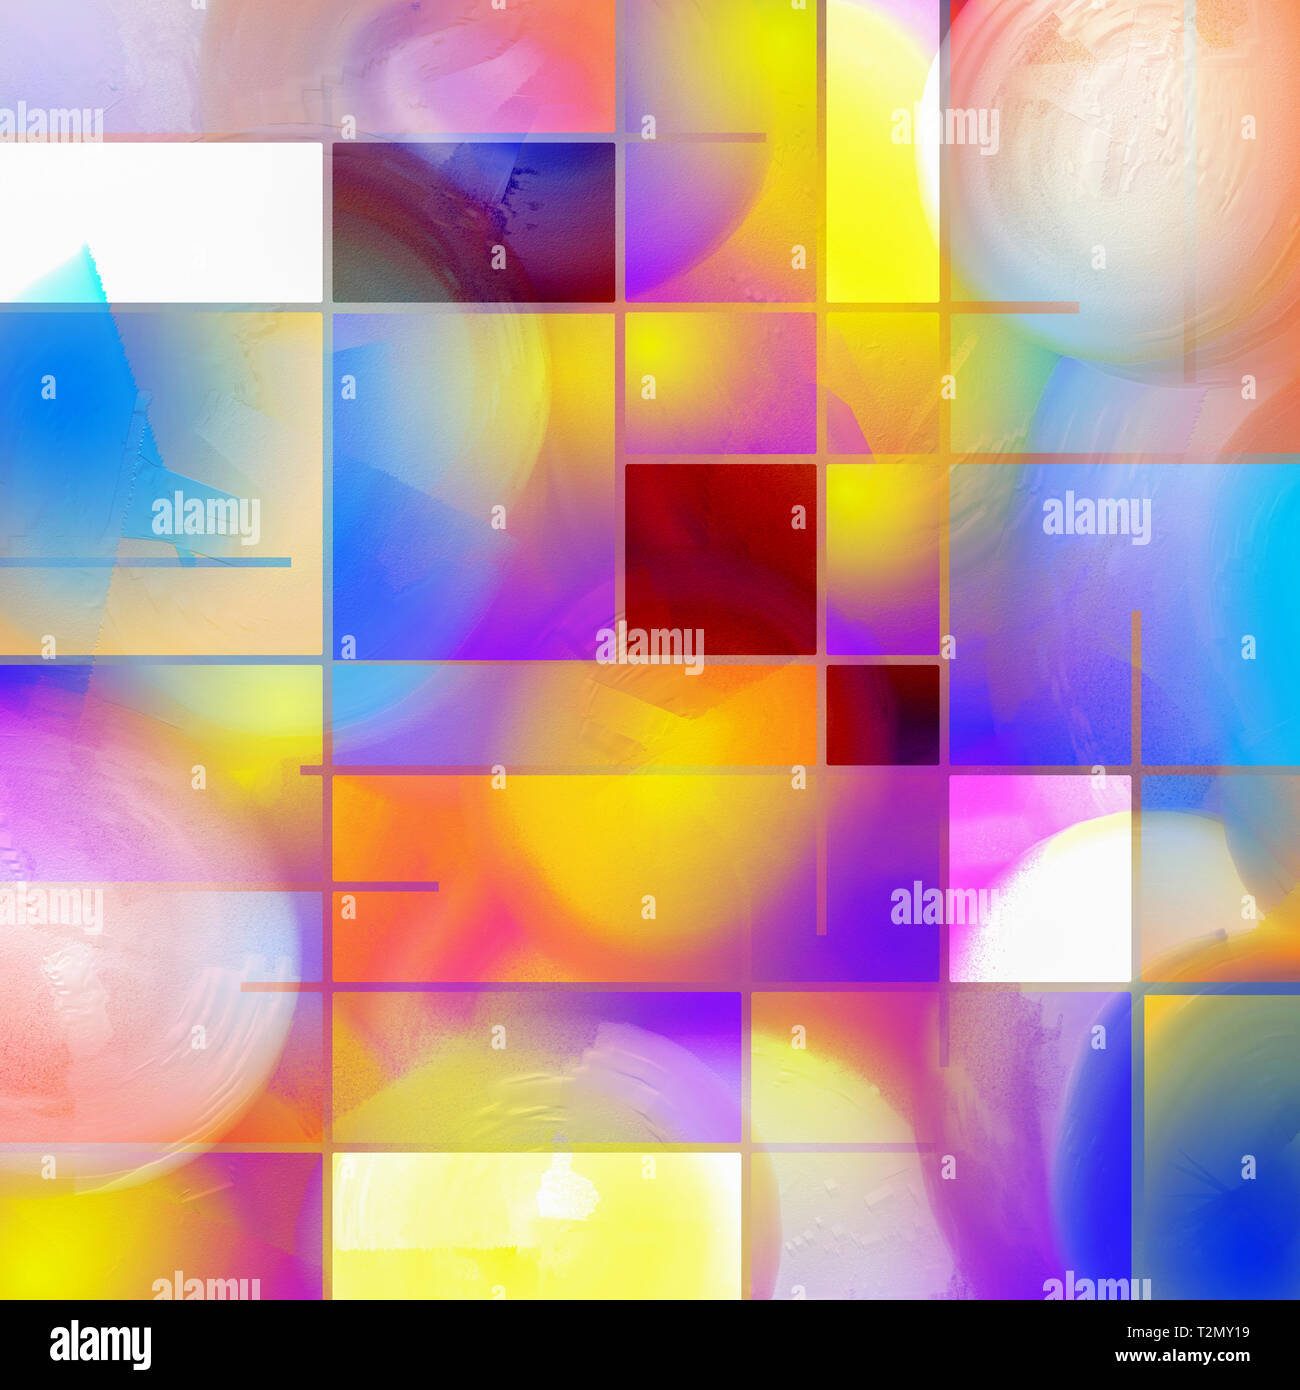 Colorful abstract composition. Mondrian style inspired Stock Photo